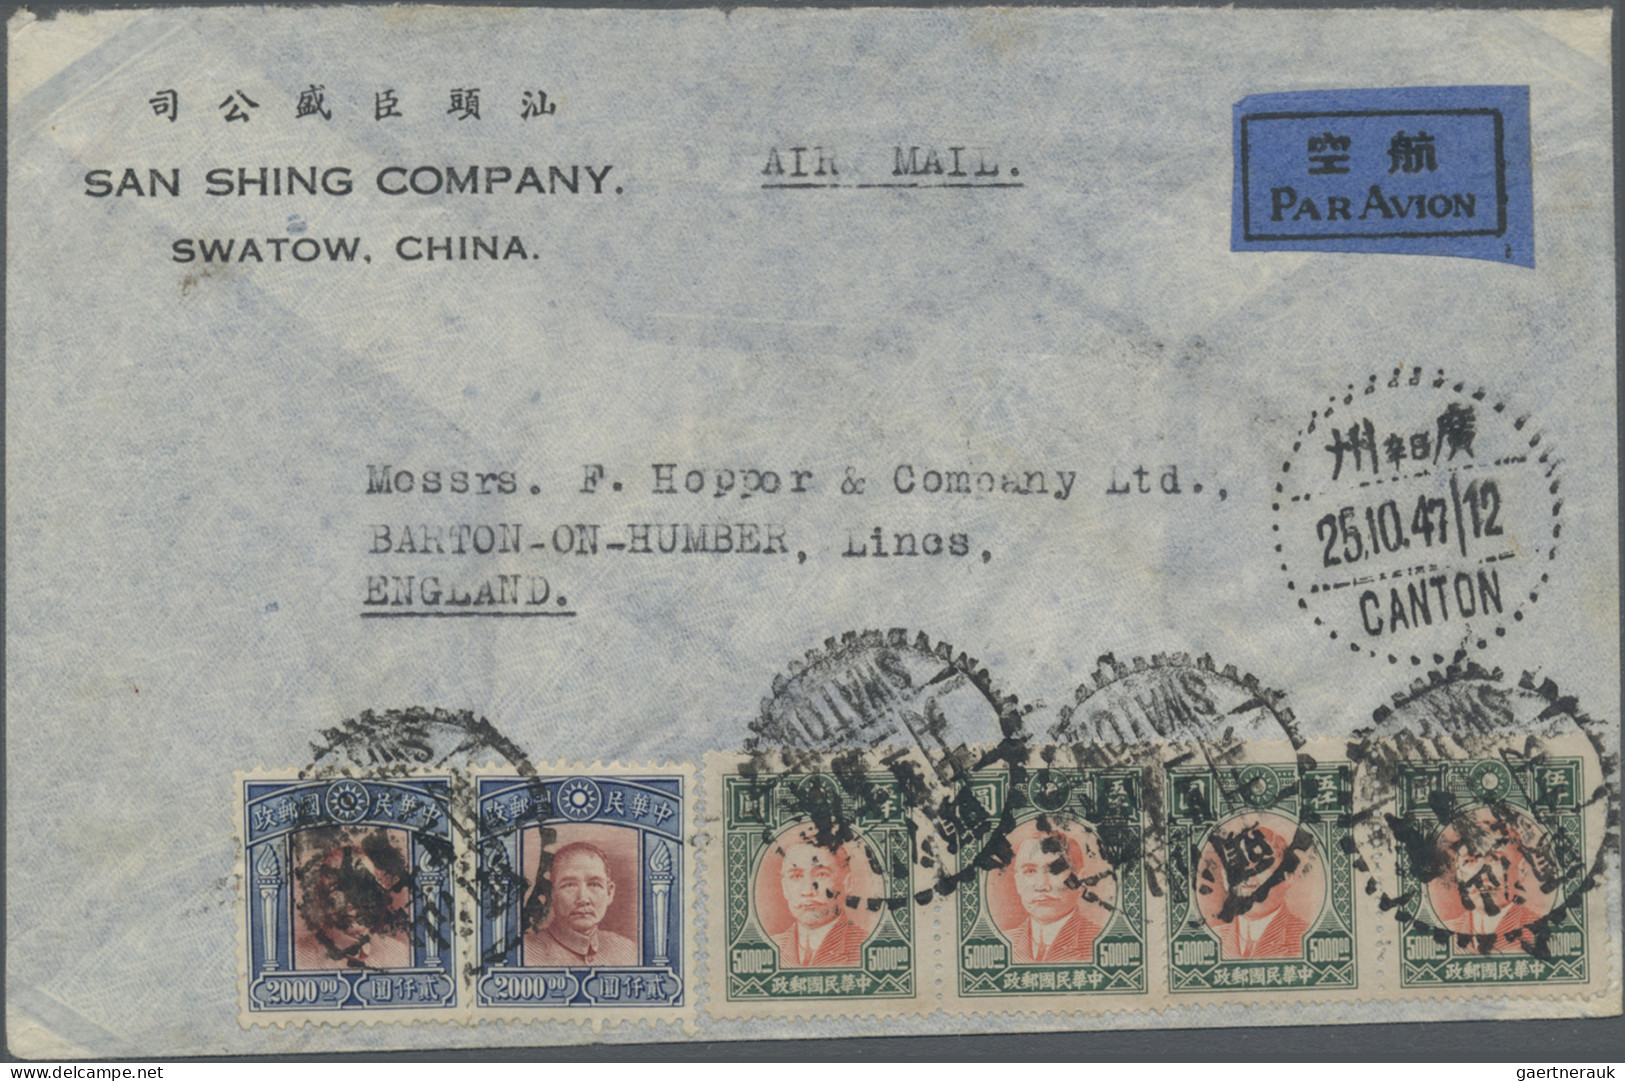 China: 1923/1948, covers (17) and cto/blanc FDC (3), including air mail, express